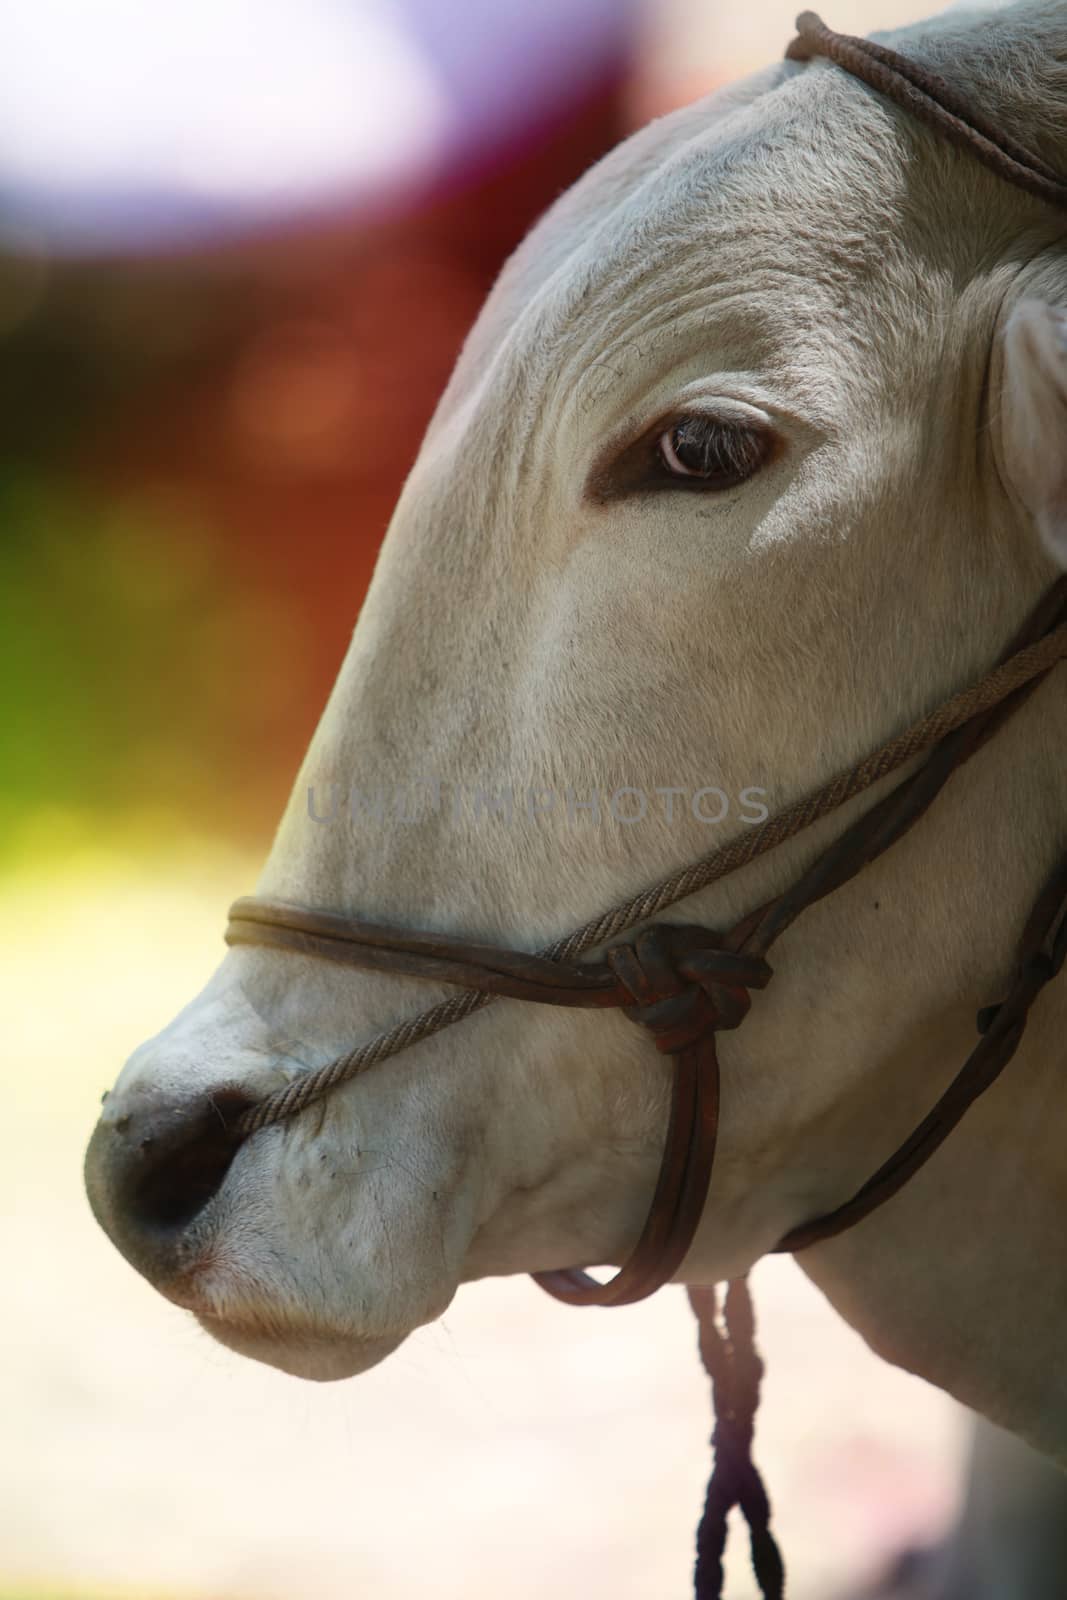 A close up portrait of an Indian bull use for farming in India.